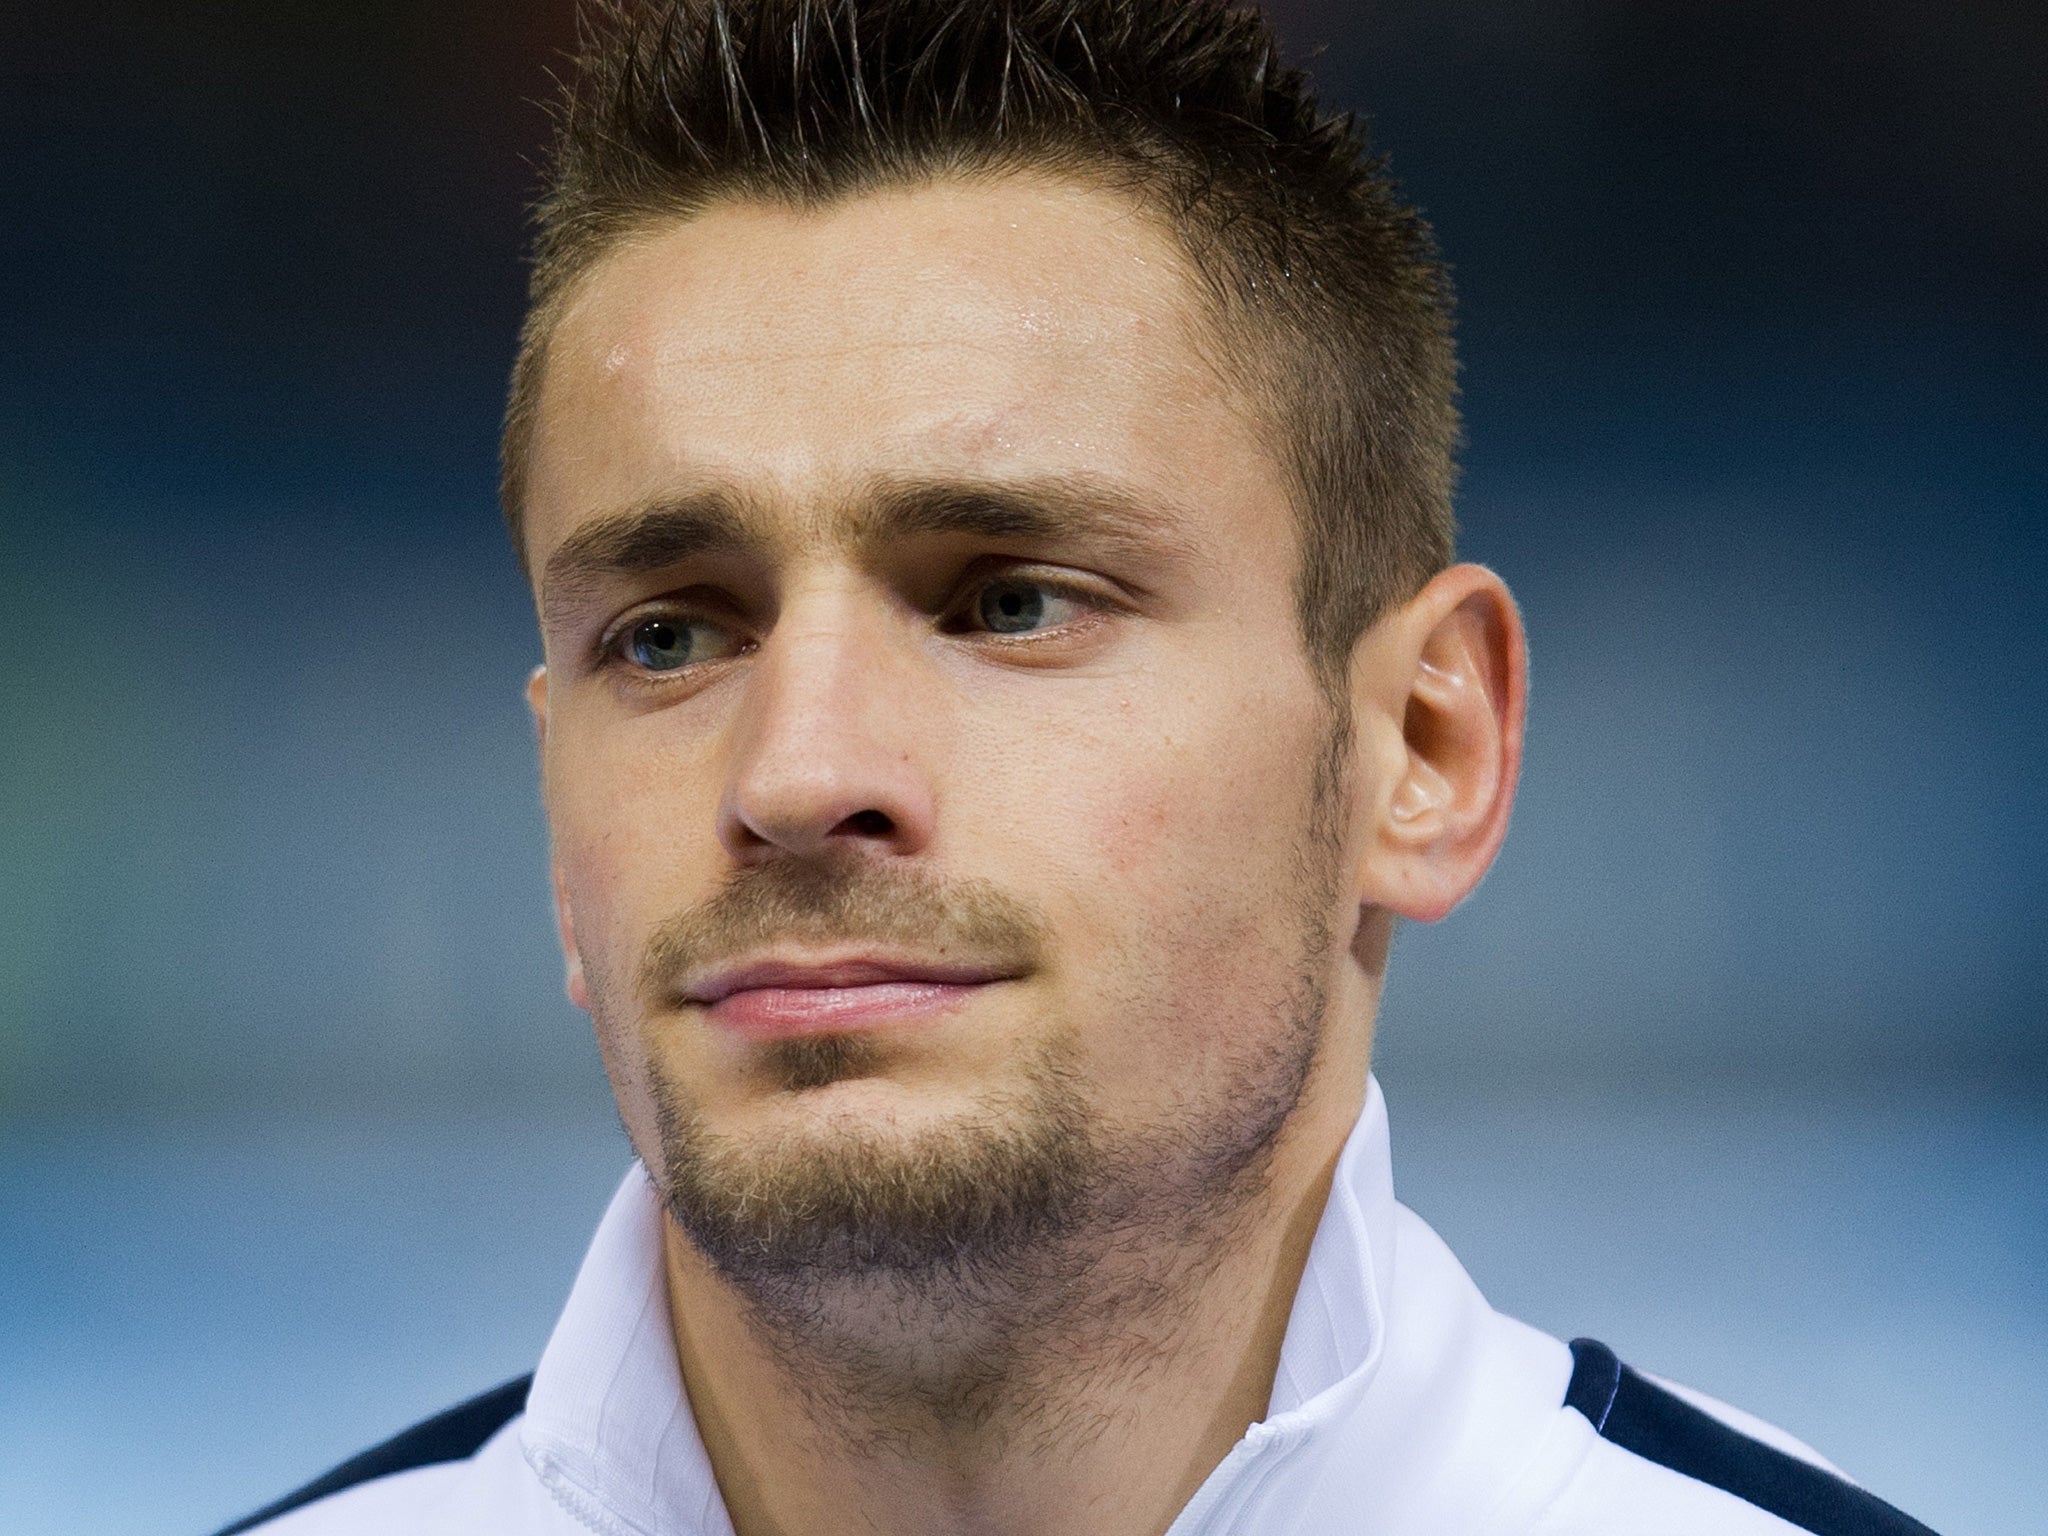 awesome Mathieu Debuchy Hairstyle 2019 | Soccer, Soccer players, Hairstyle